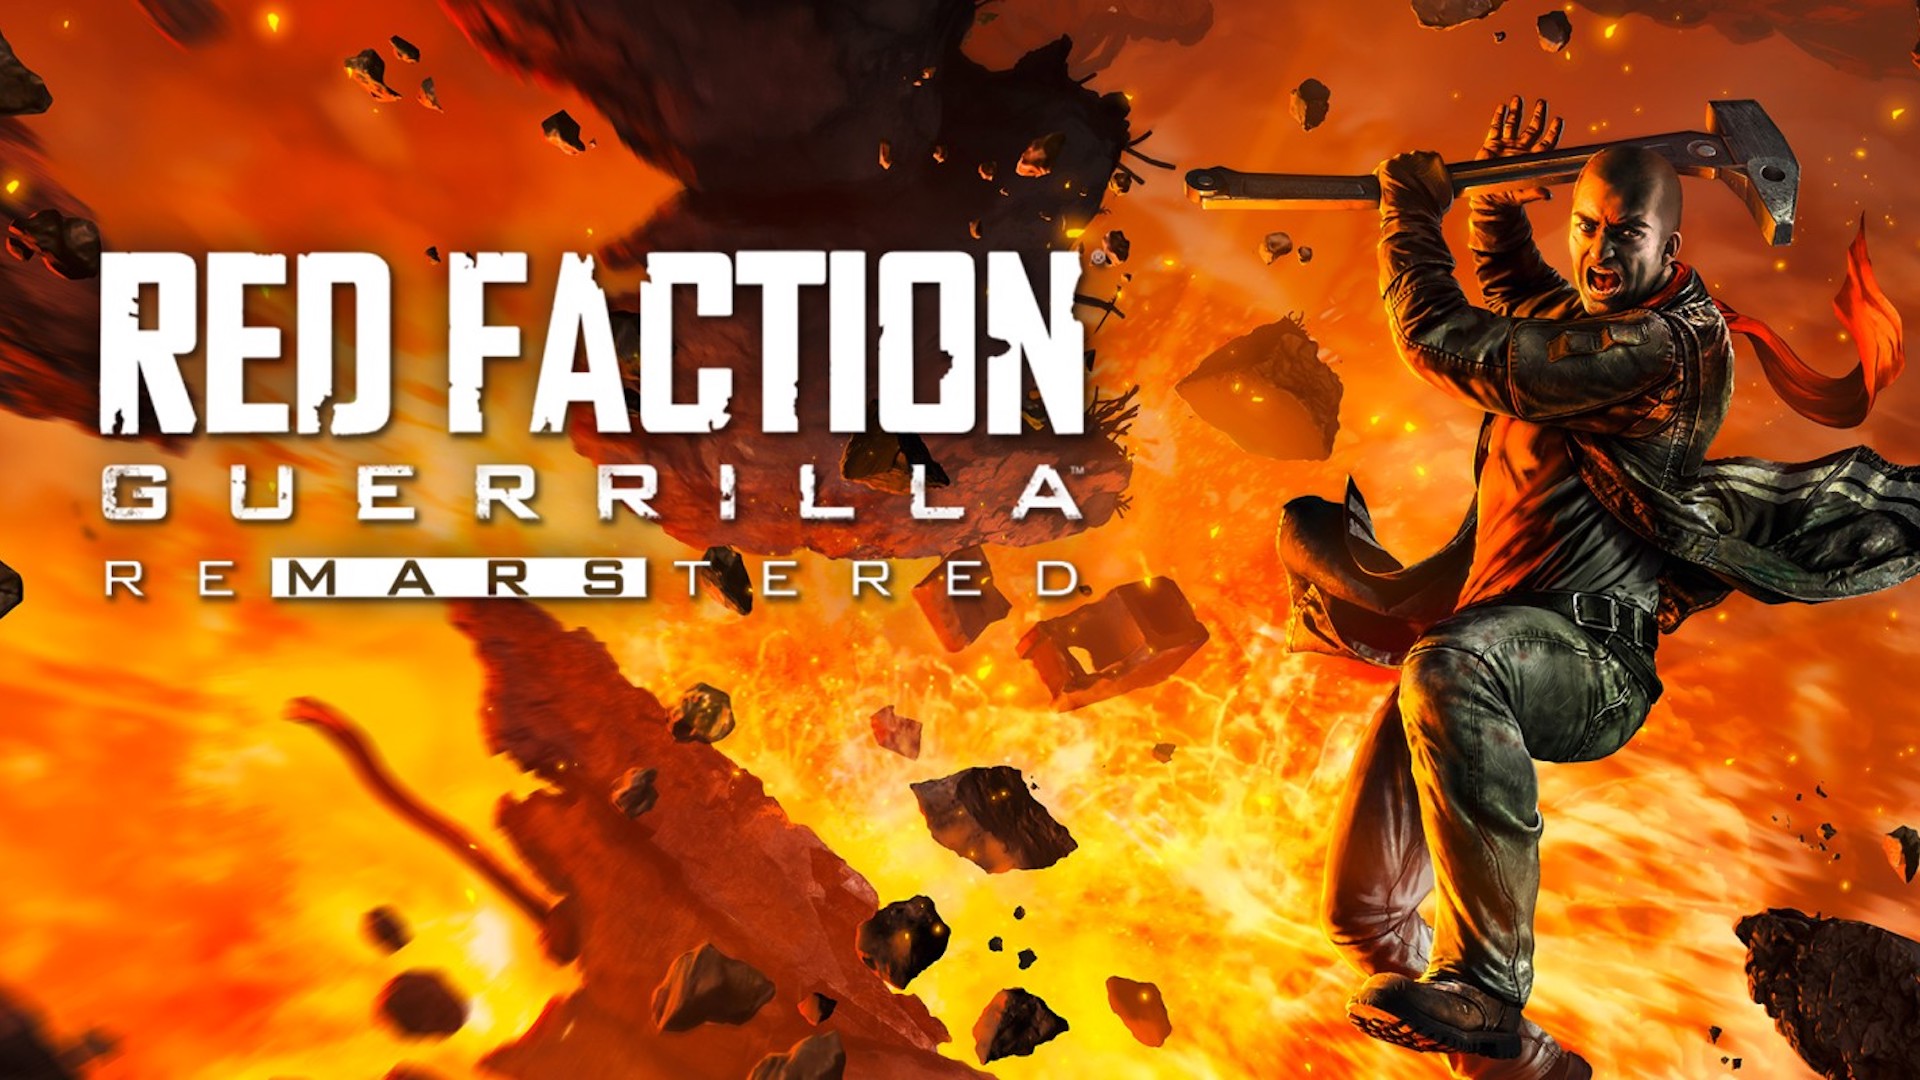 Red Faction Guerrilla Re Mars tered wallpaper 2